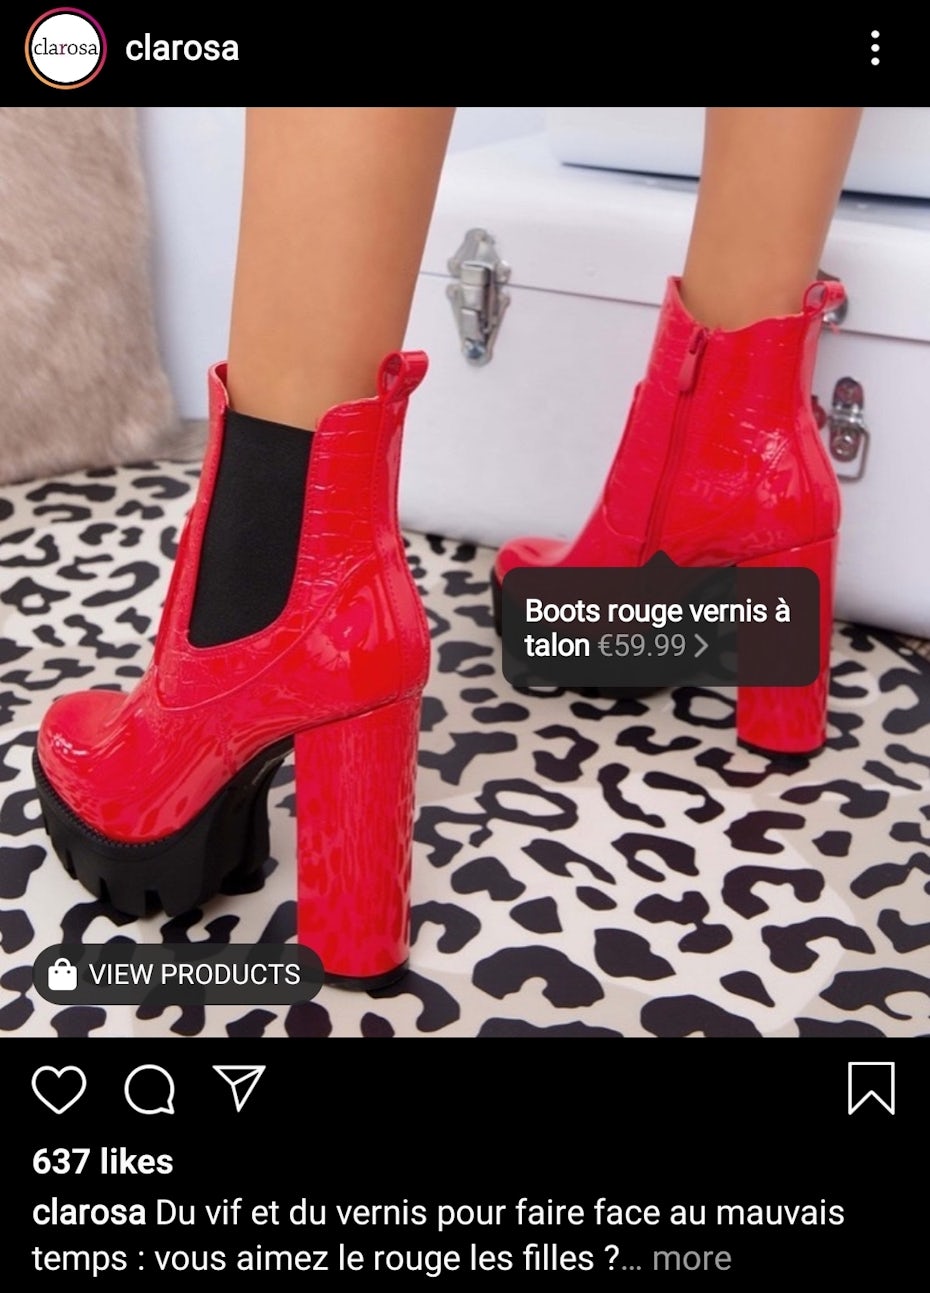 Digital marketing trend 2020 example: Screenshot of a shoppable post on Instagram.